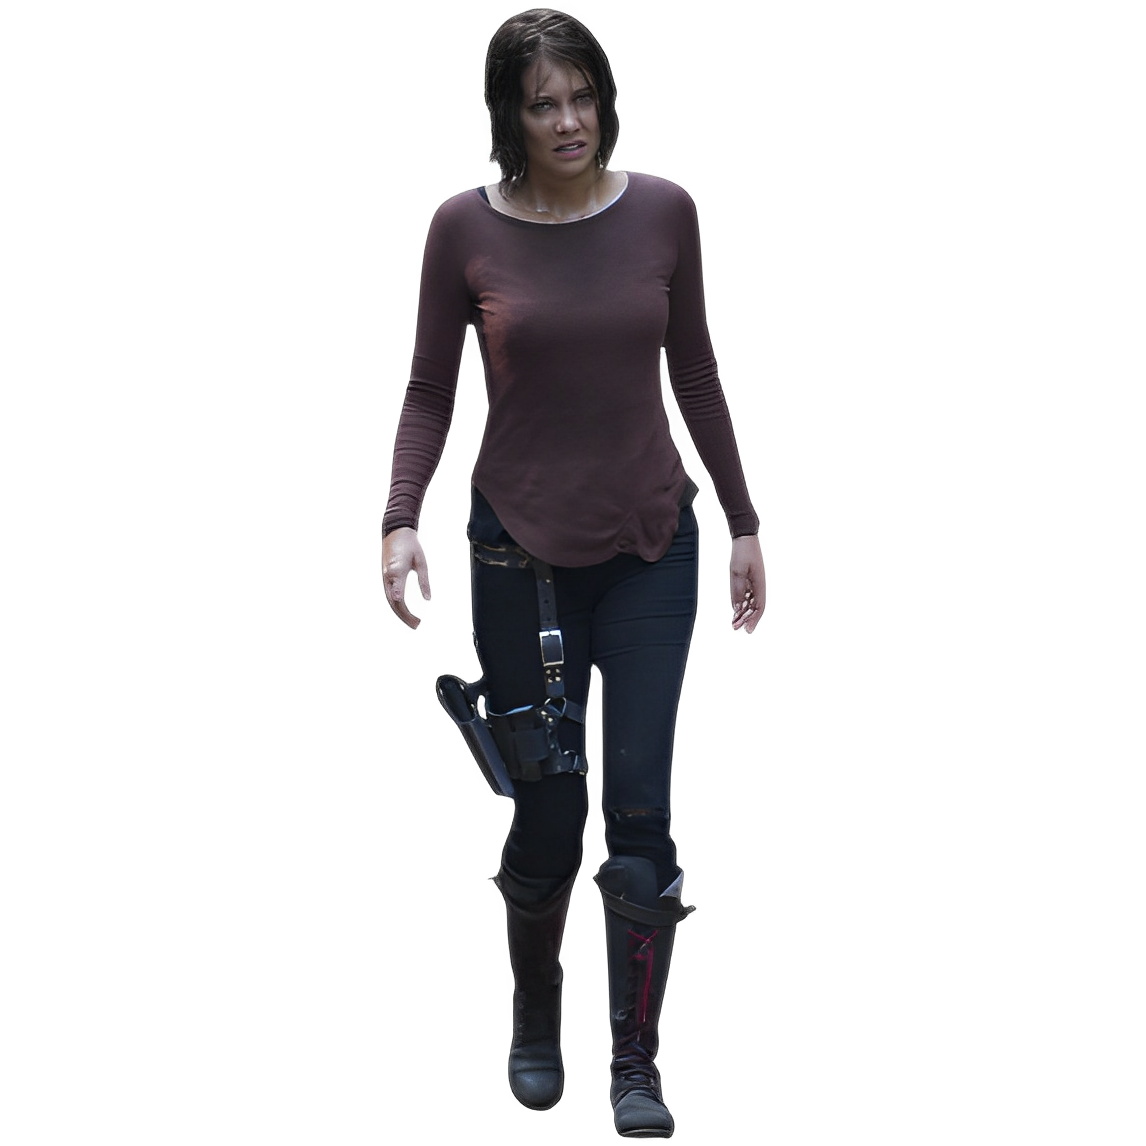 The Walking Dead [Maggie Greene] - Action Figures & Statues